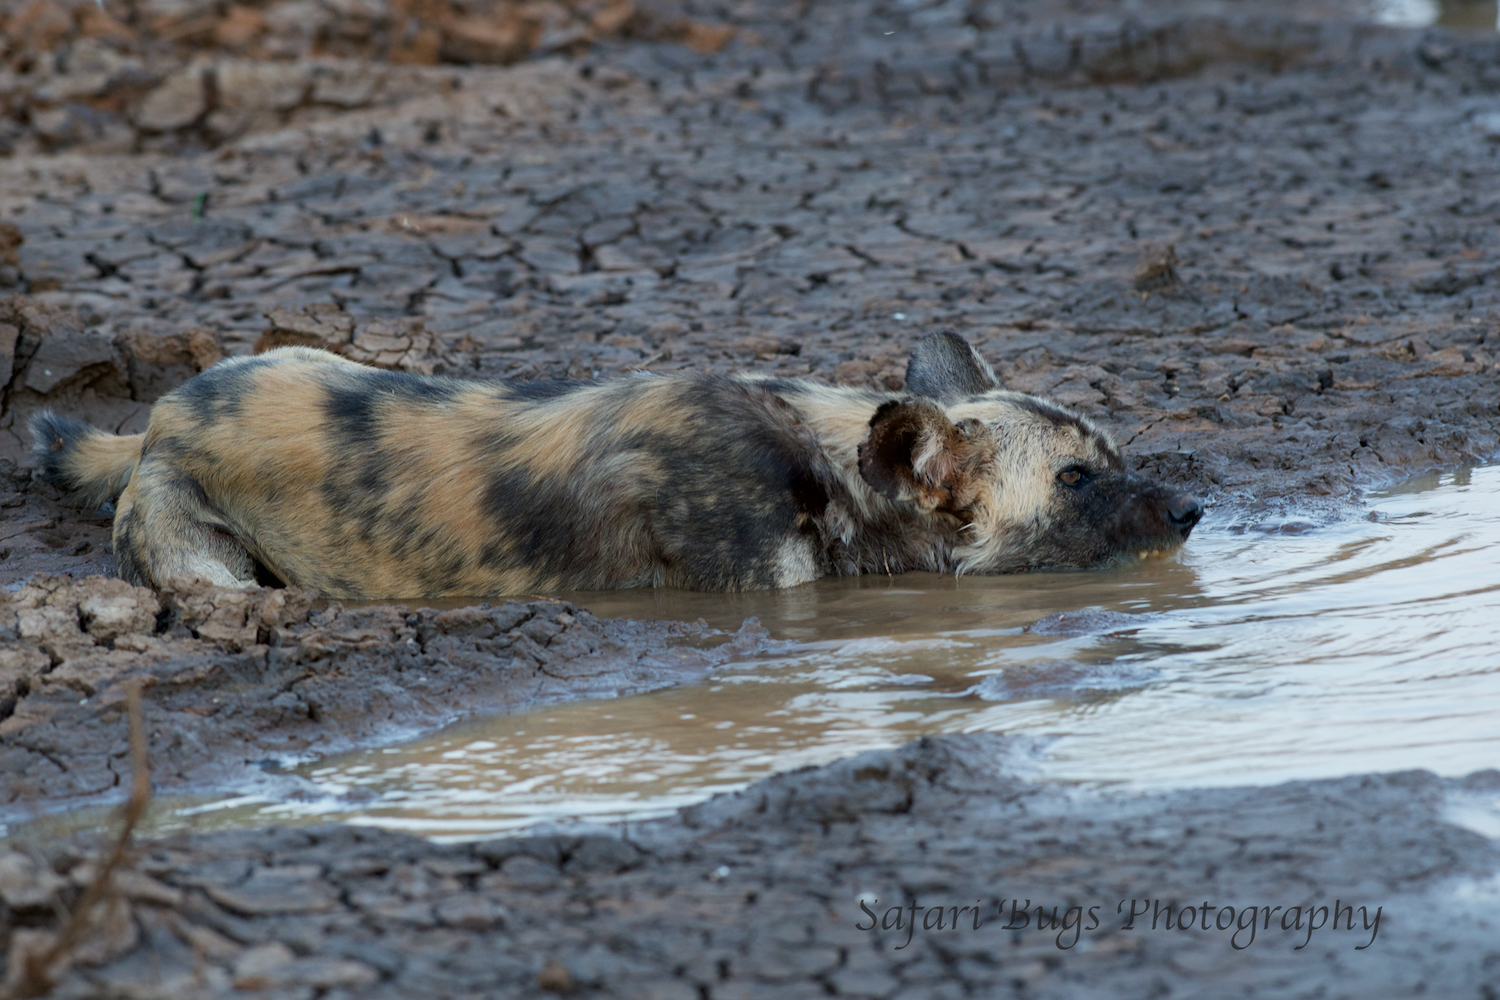  And, what's better than drinking water standing up? &nbsp;Laying in it while drinking, of course. &nbsp;They eventually found some wildebeest, but it was getting too dark to follow. 